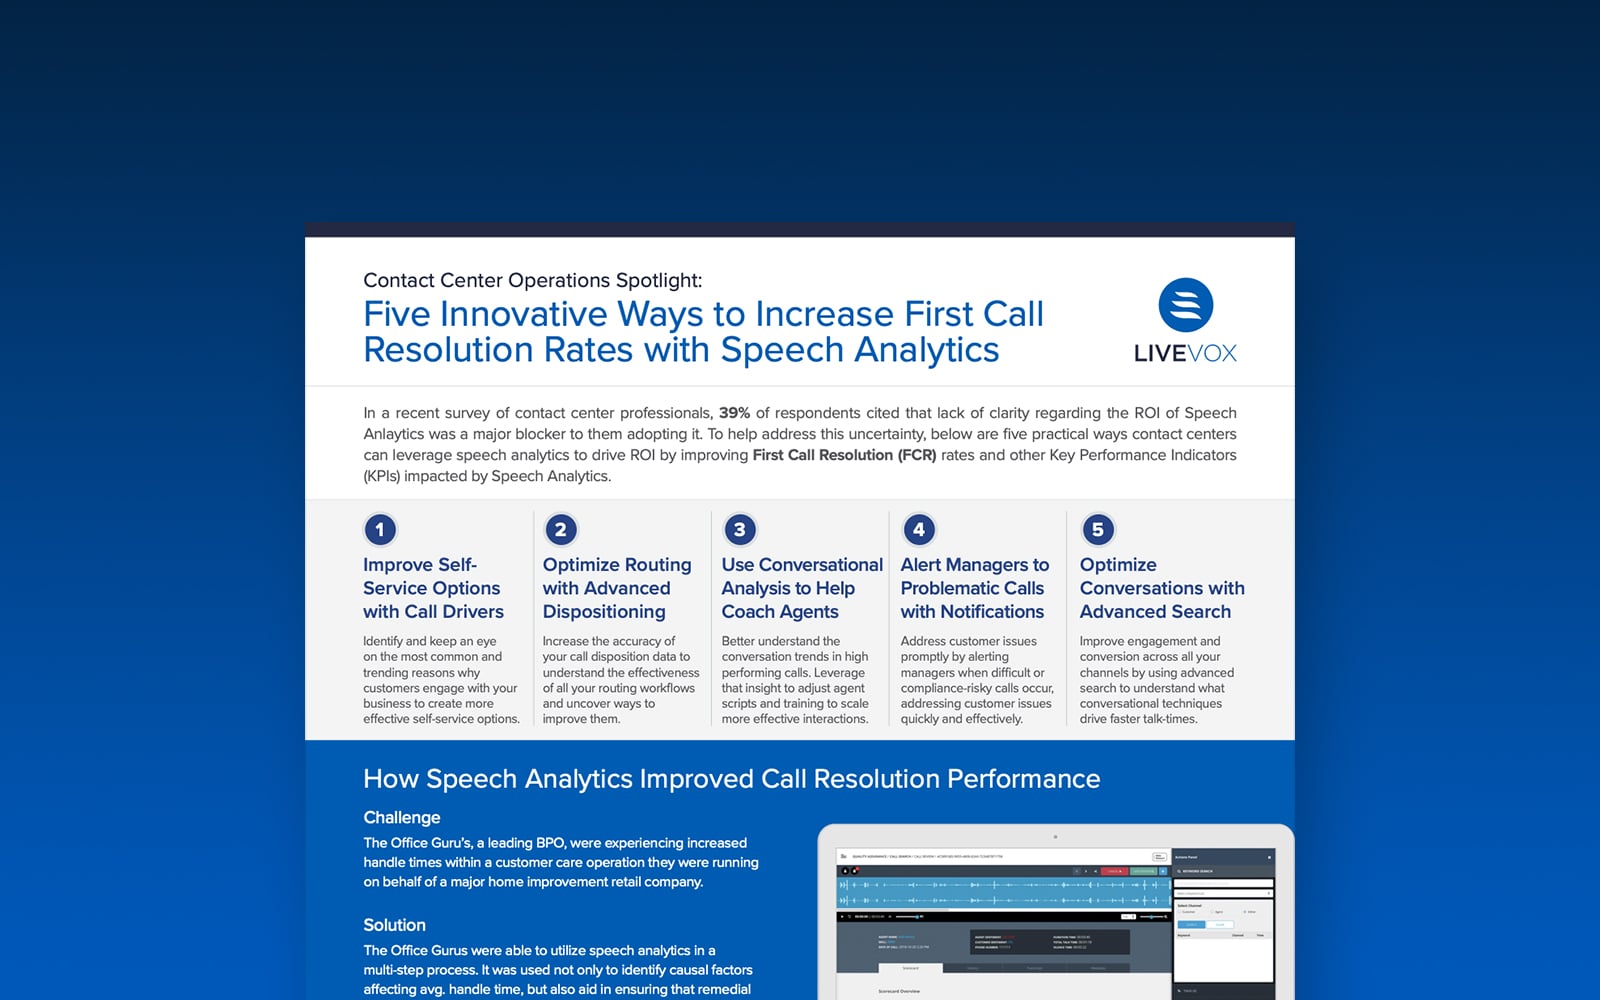 Operations Spotlight: 5 Innovative Ways to Increase First Call Resolution Rates with Speech Analytics